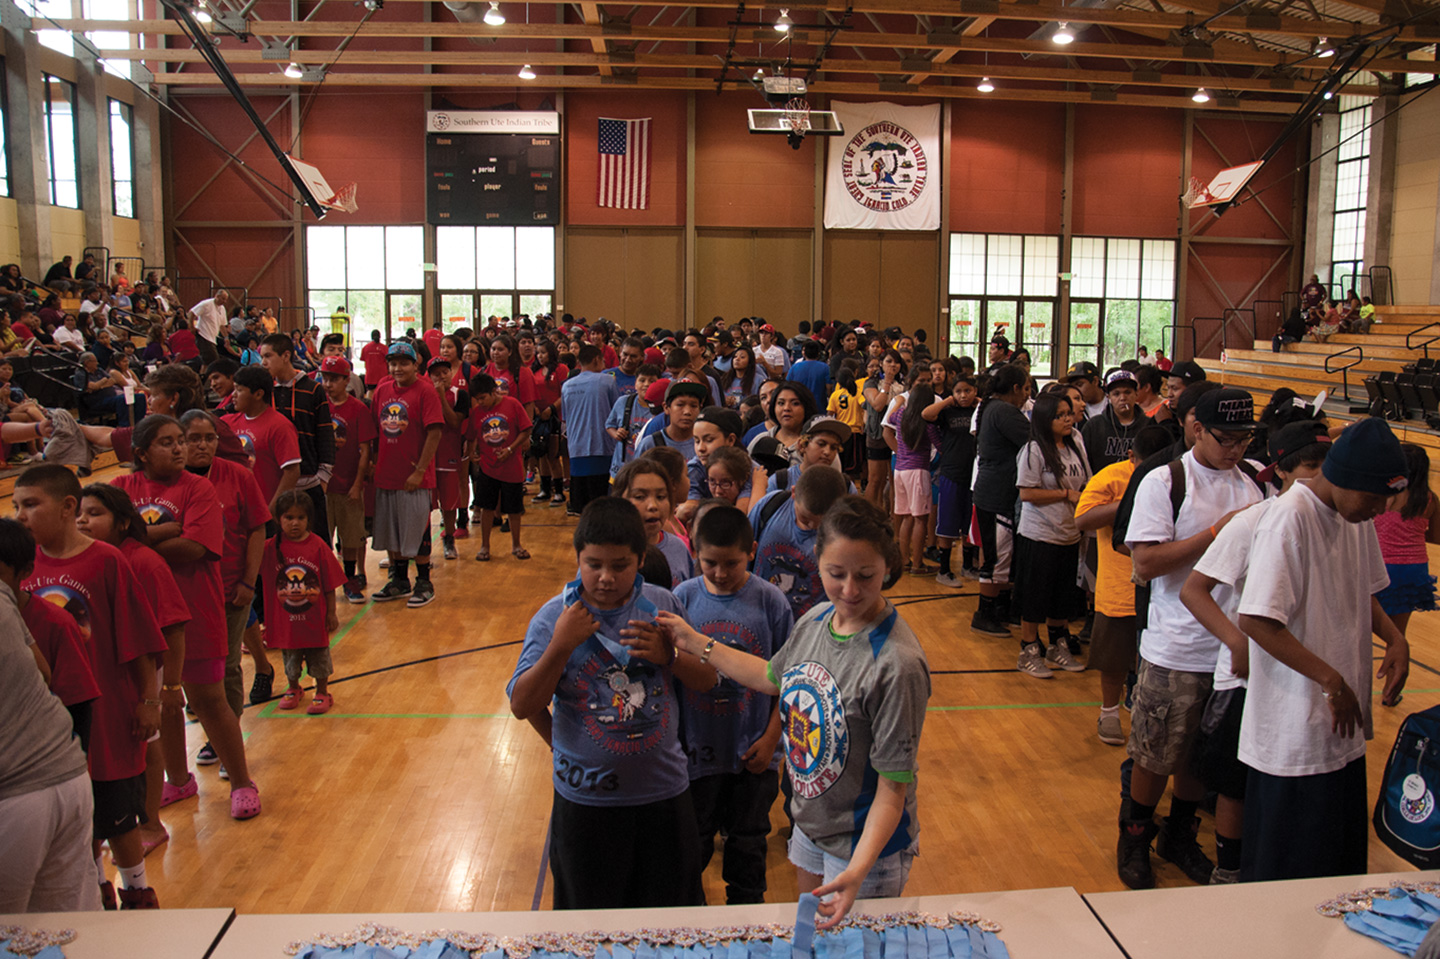 Participants from (left to right) the Northern Ute, Southern Ute and Ute Mountain Ute tribes line up inside the SunUte Community Center gym on Wednesday, July 24 to receive a medal and T-shirt.